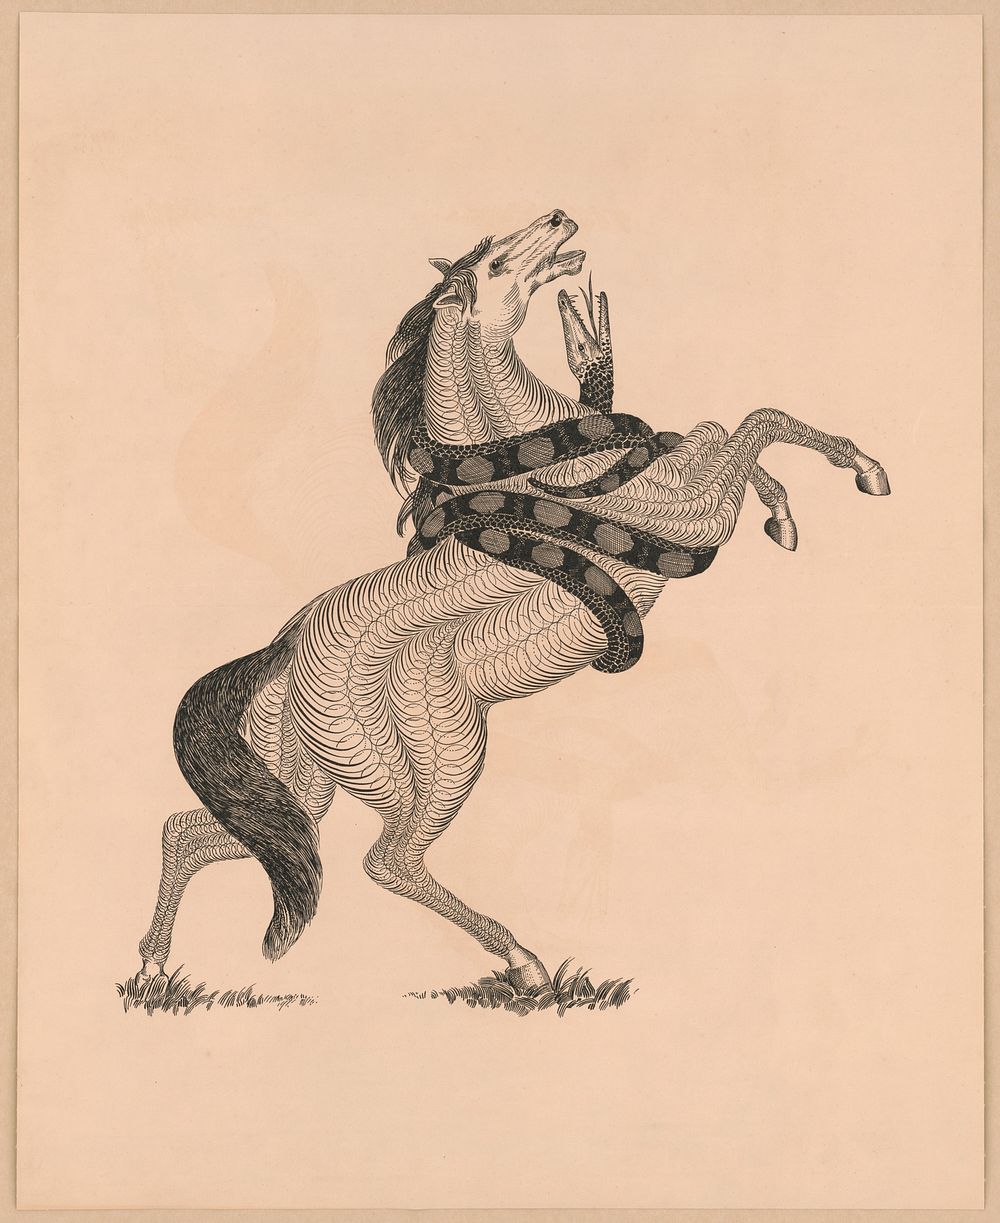 [Spiral horse attacked by snake]